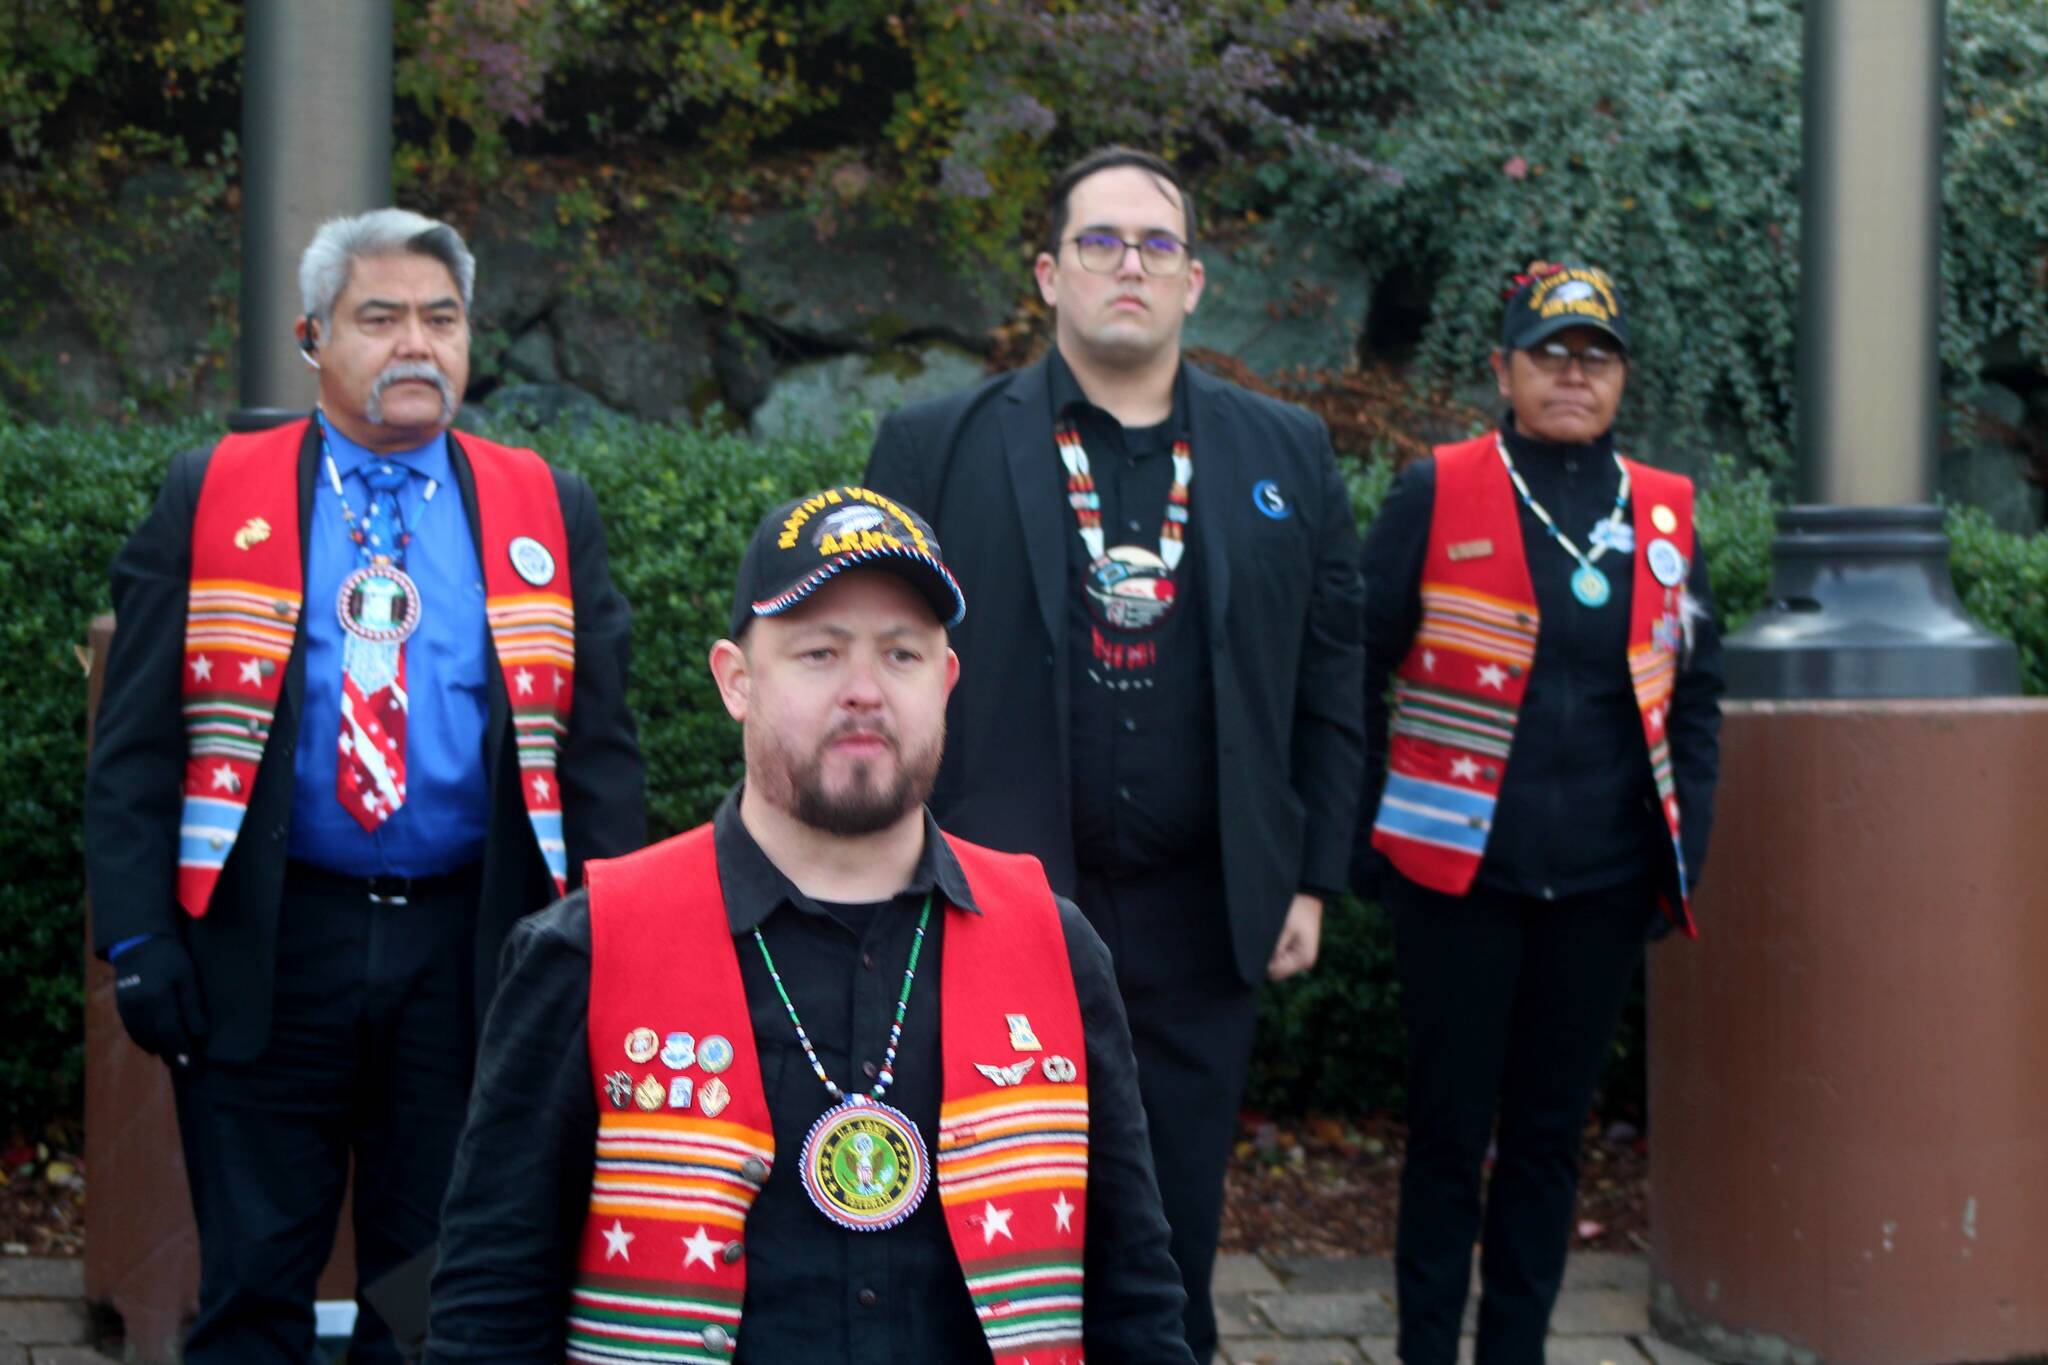 Josh Fackrell (front), an Army Veteran and Snoqualmie Tribal member, leads the Tribe’s Honor Guard in a flag ceremony outside the casino.